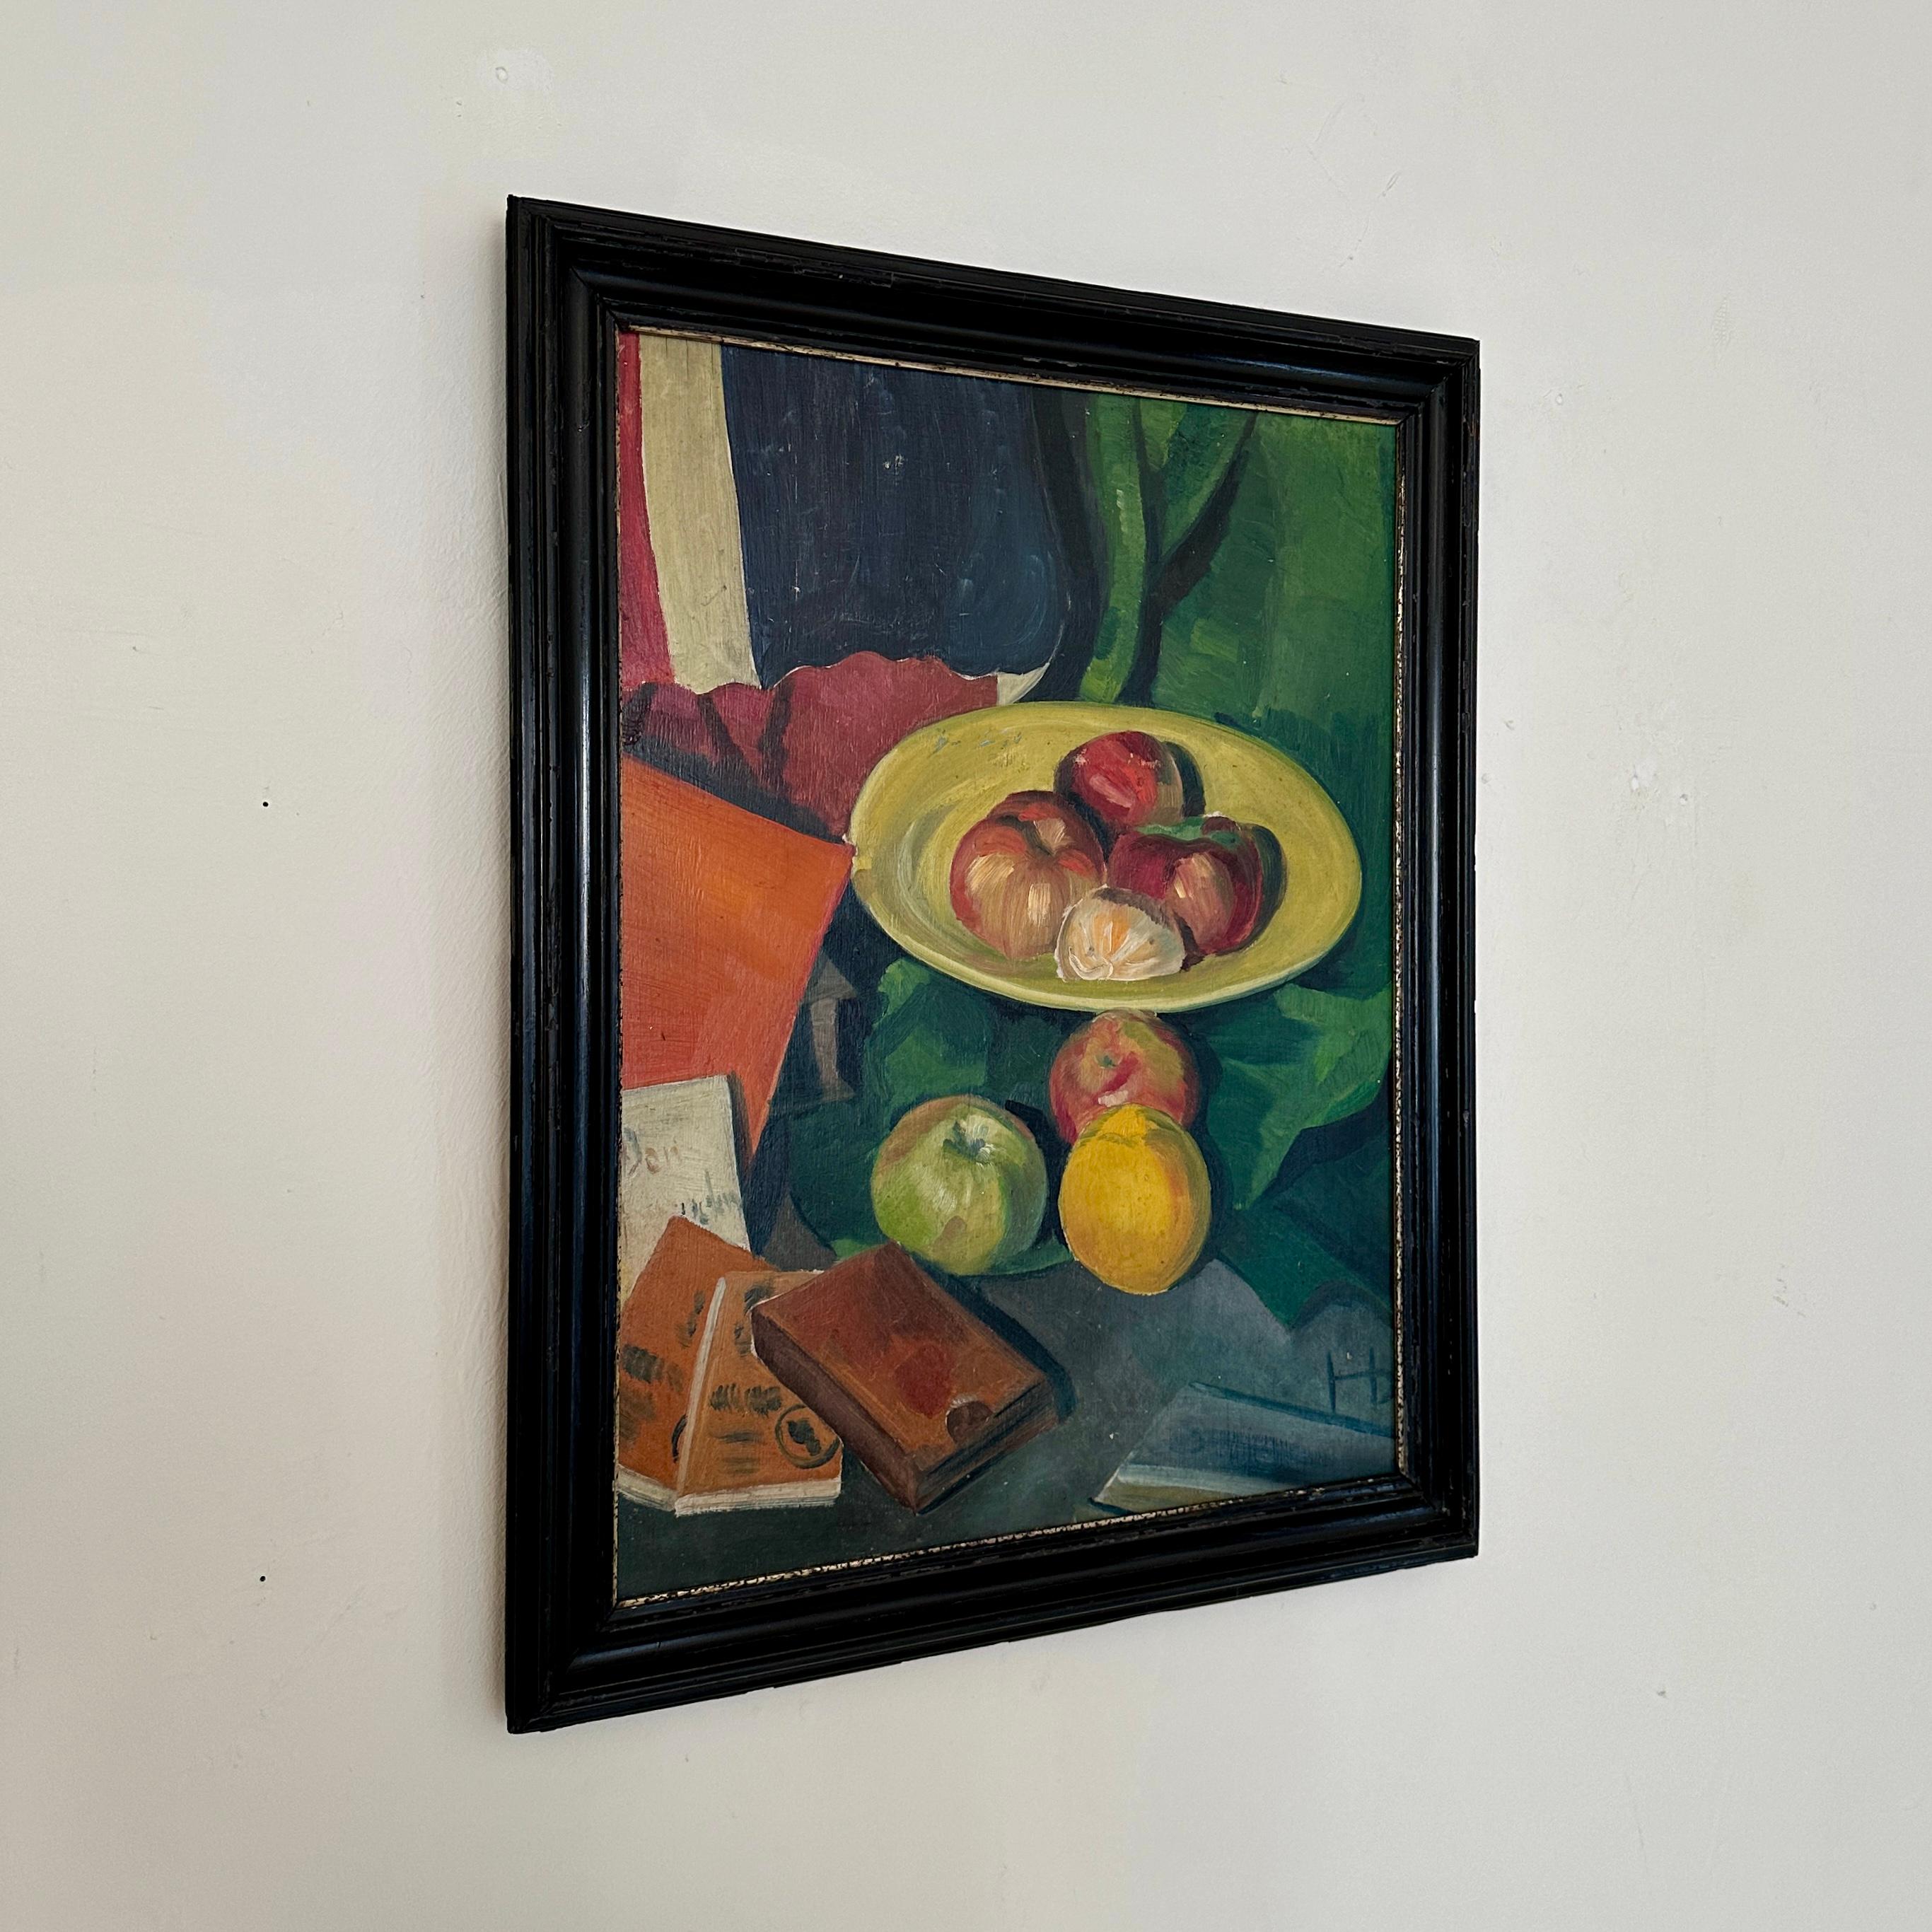 German 1920s Naive Still Life Oil Painting with Fruits and Books in a Black Frame For Sale